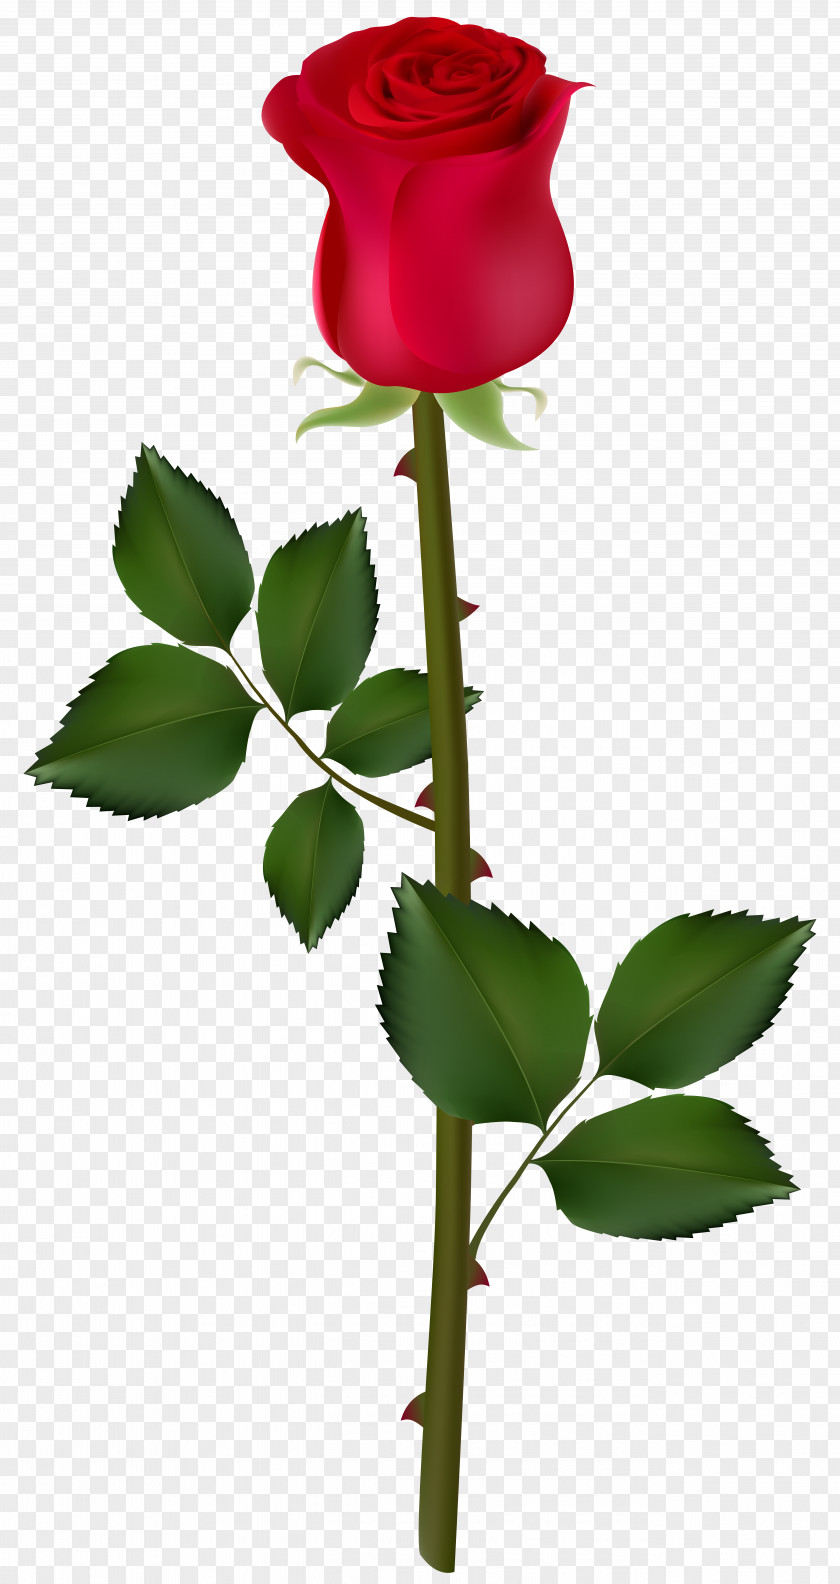 Red Rose Image Graphics Clip Art PNG